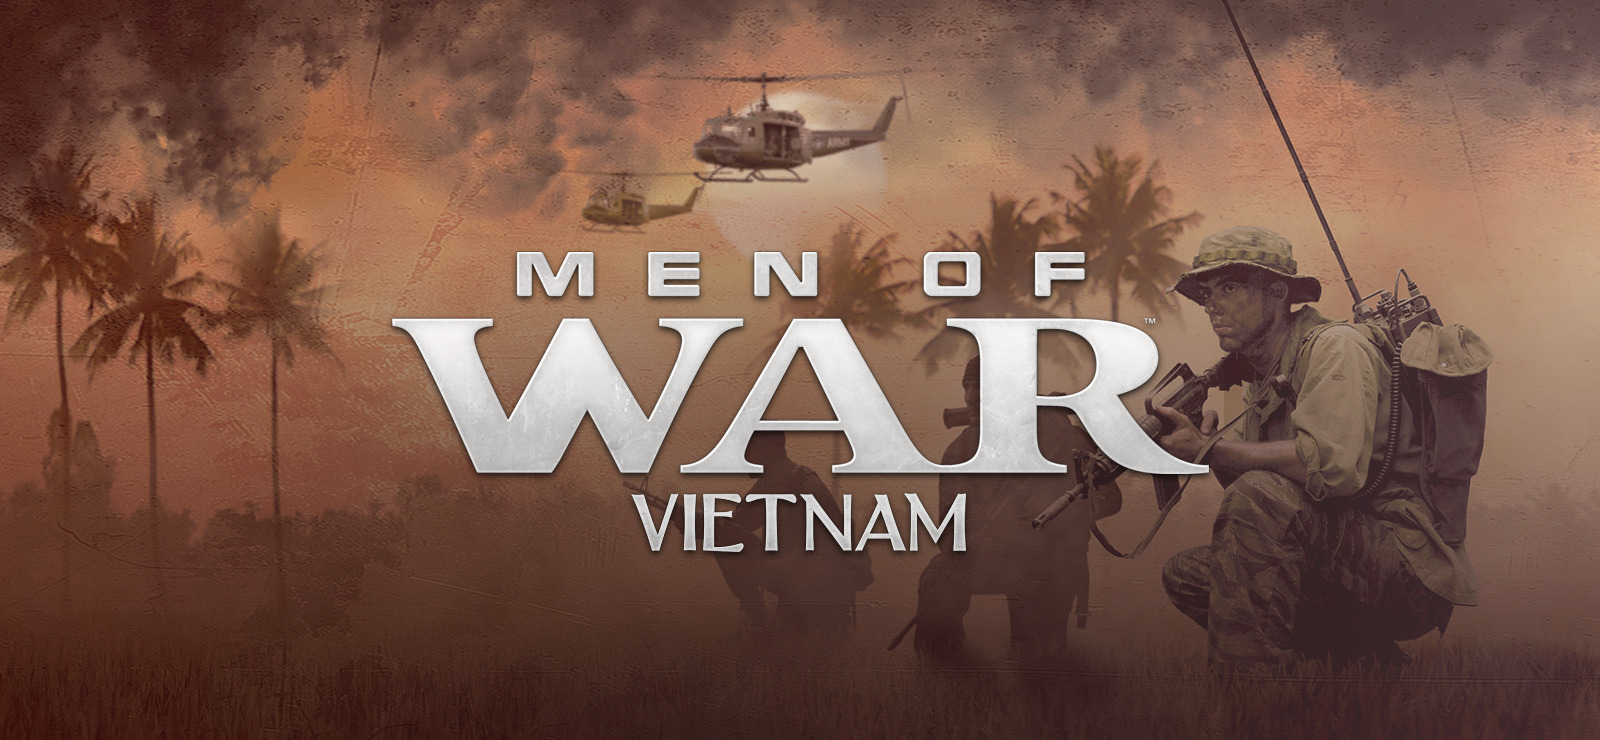 Viet Nam Piece Codes [Upd 3.5] - Try Hard Guides